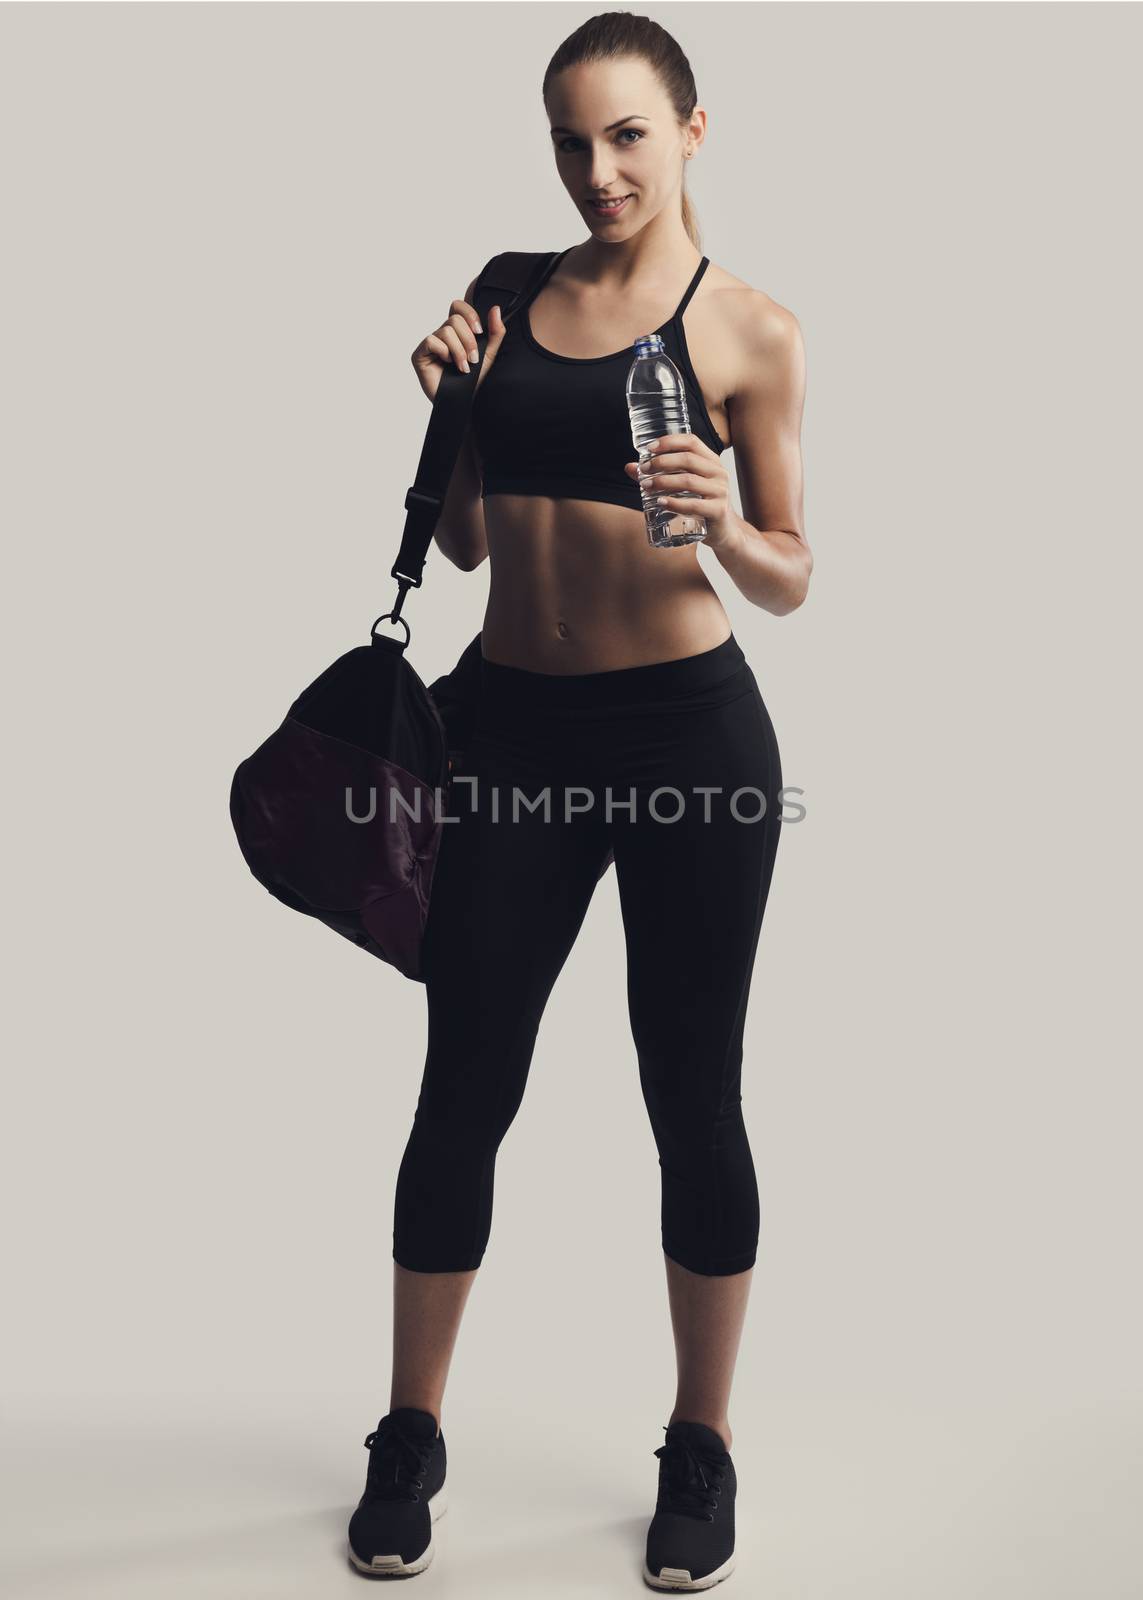 Portrait of sporty young woman posing with a gym bag and holding a water bottle